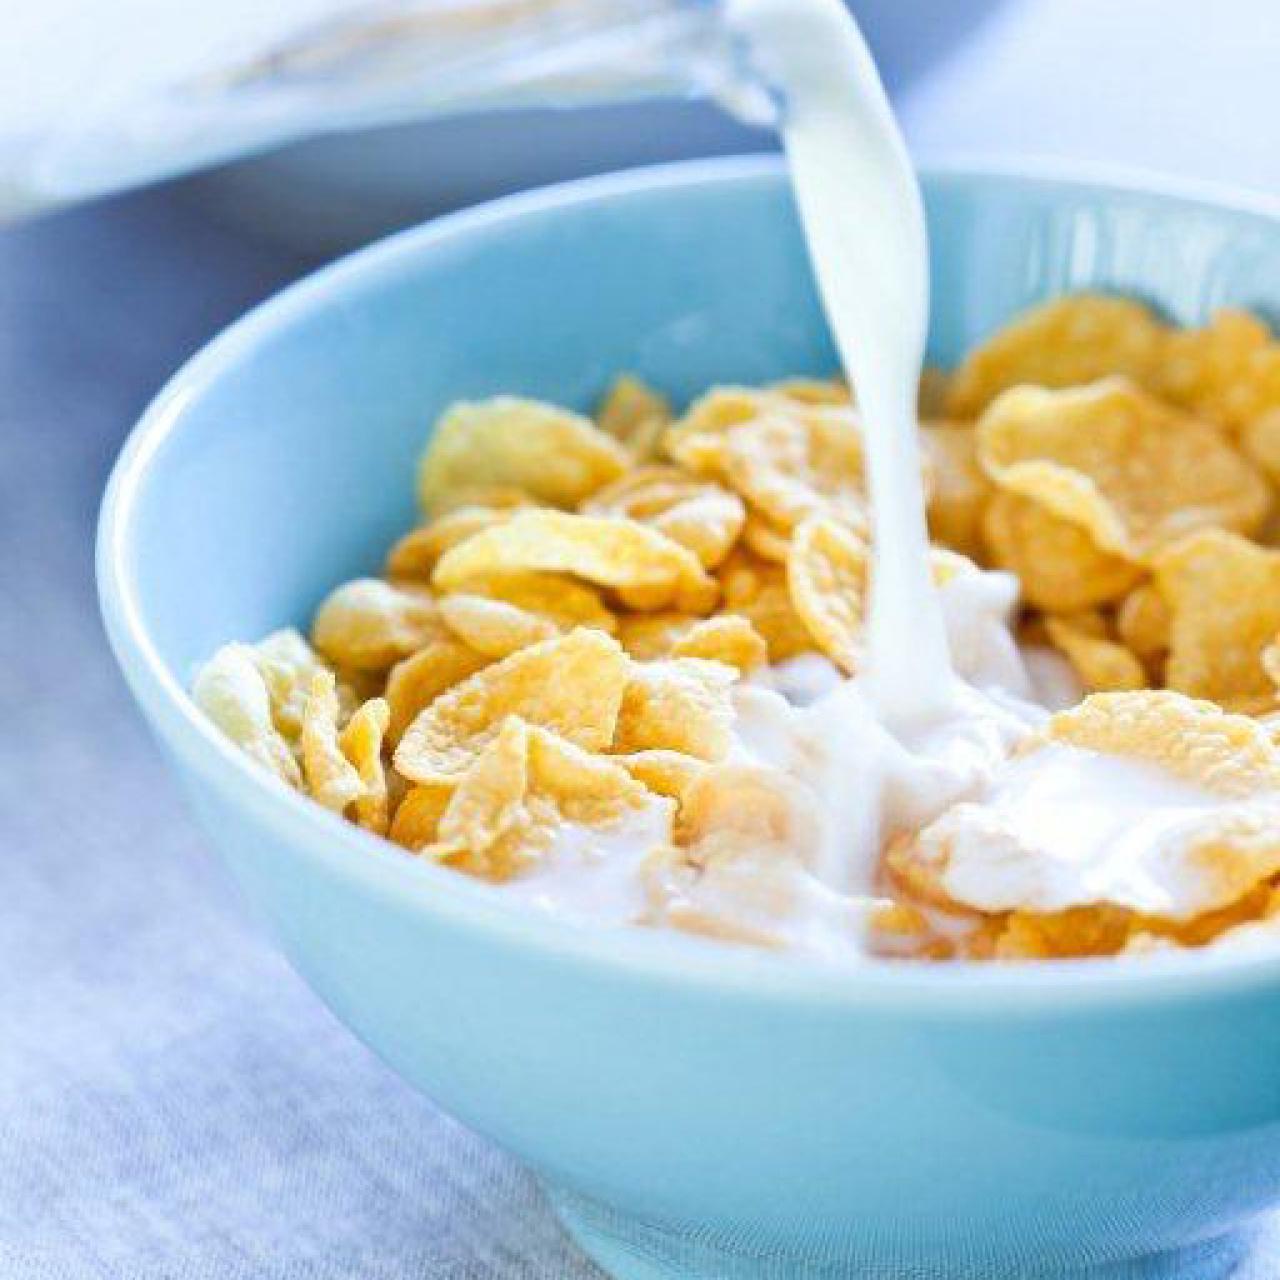 Cereal eating technique should be lots of milk with small pours.